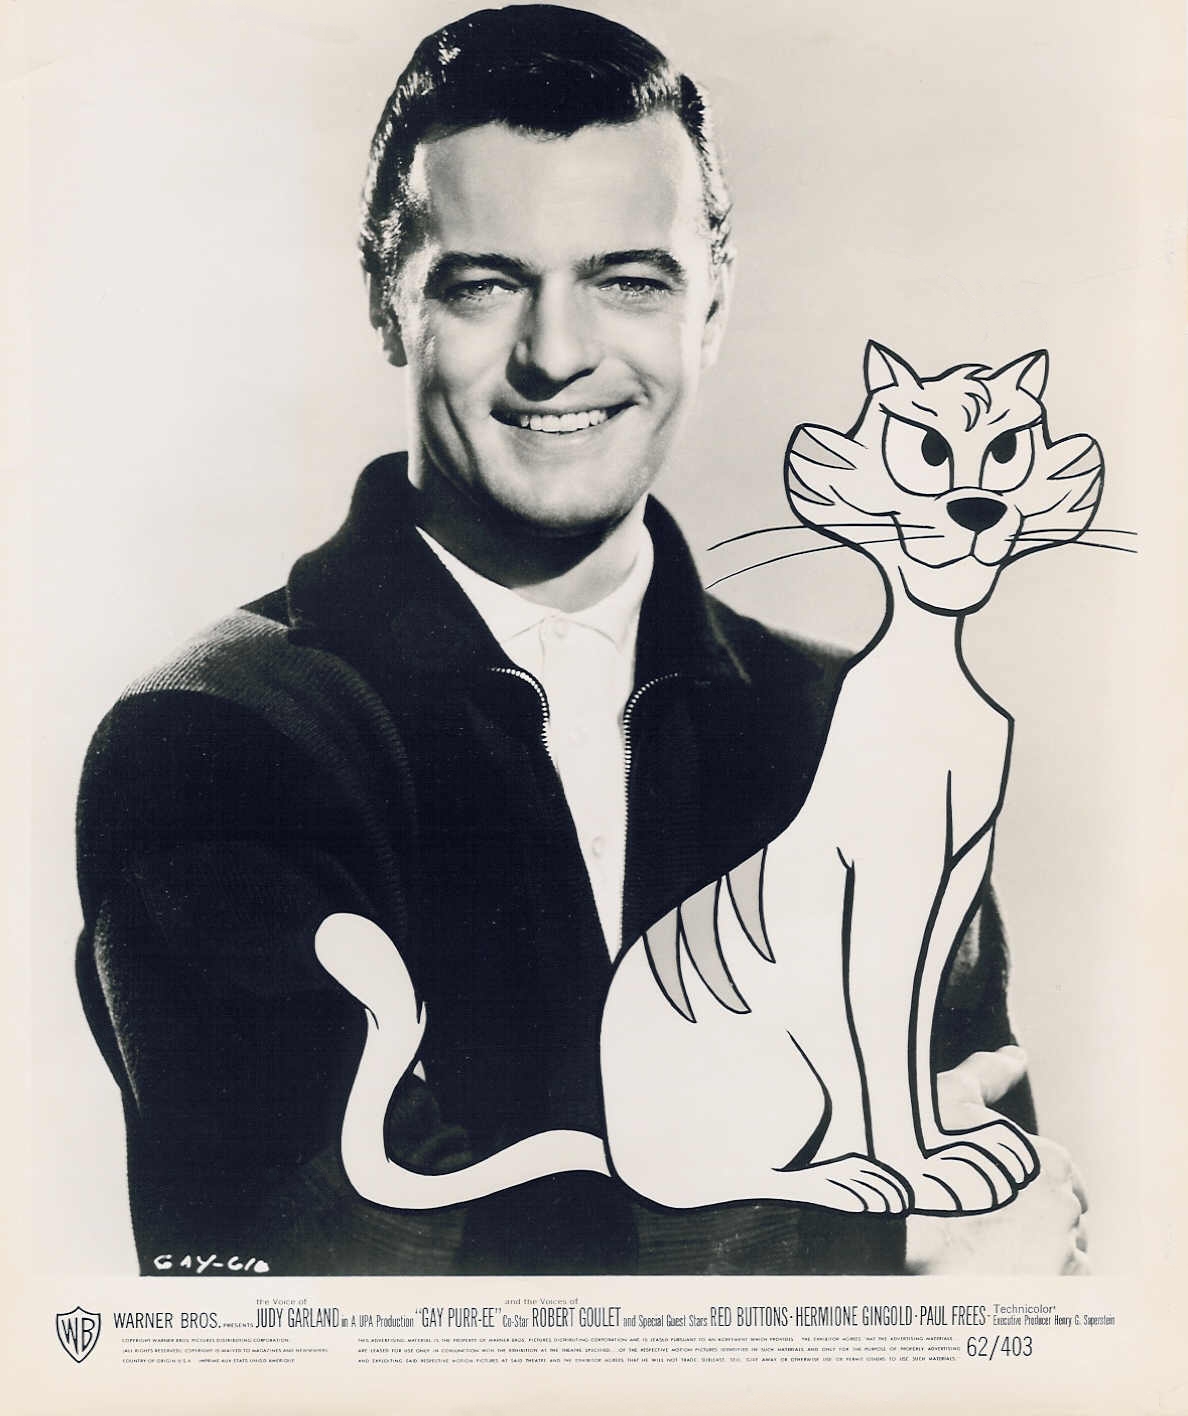 Robert Goulet 
in animated movie "Gay Purr-ee"